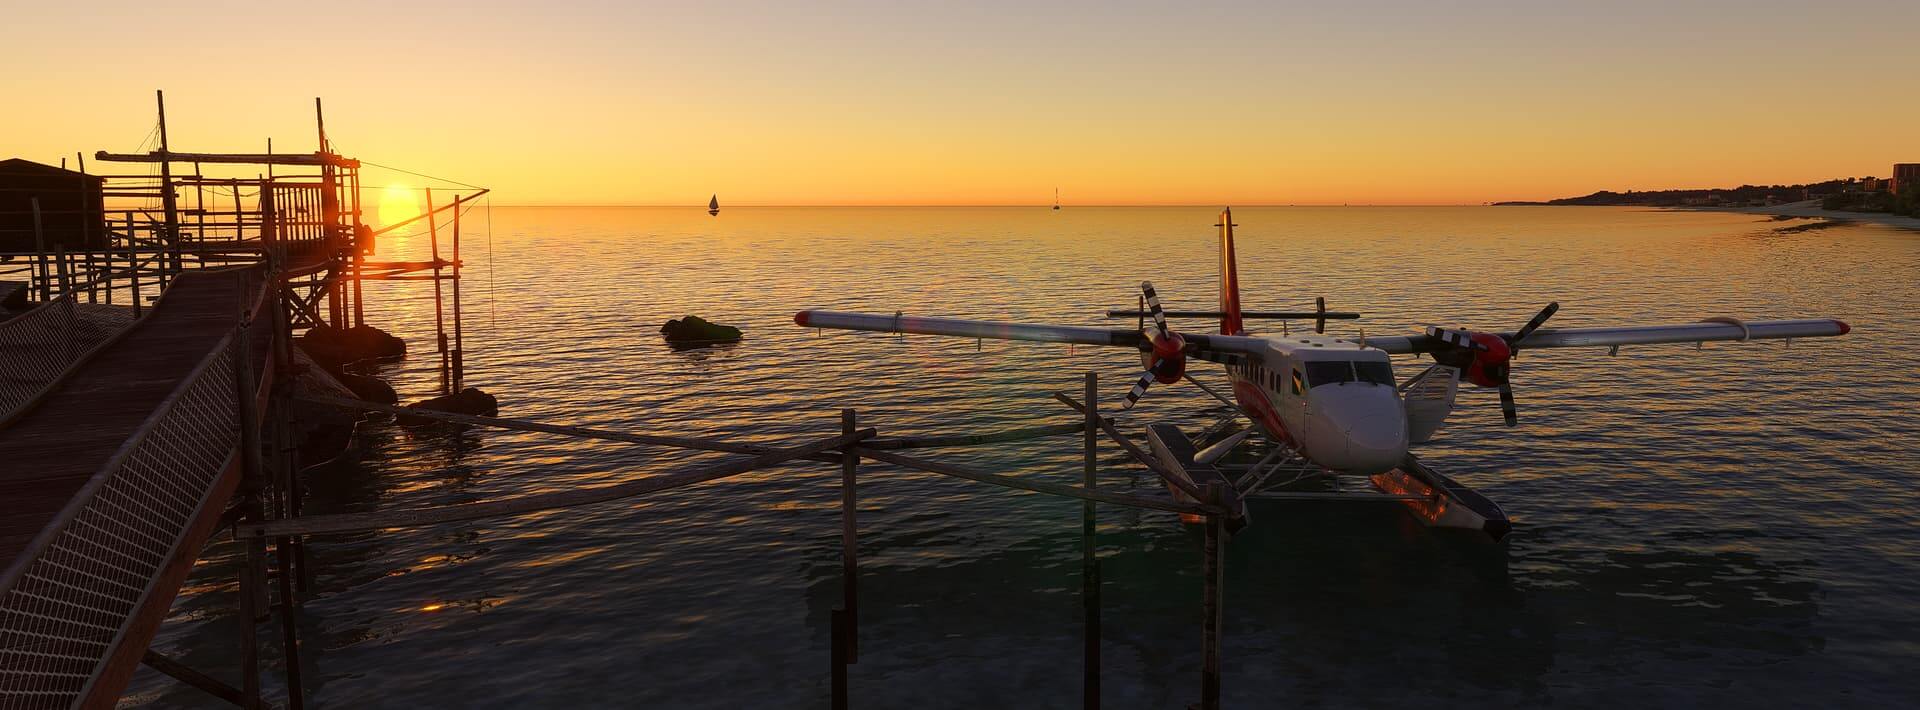 A dual engine seaplane rests on calm waters near the shore, as the sun sets in the distance